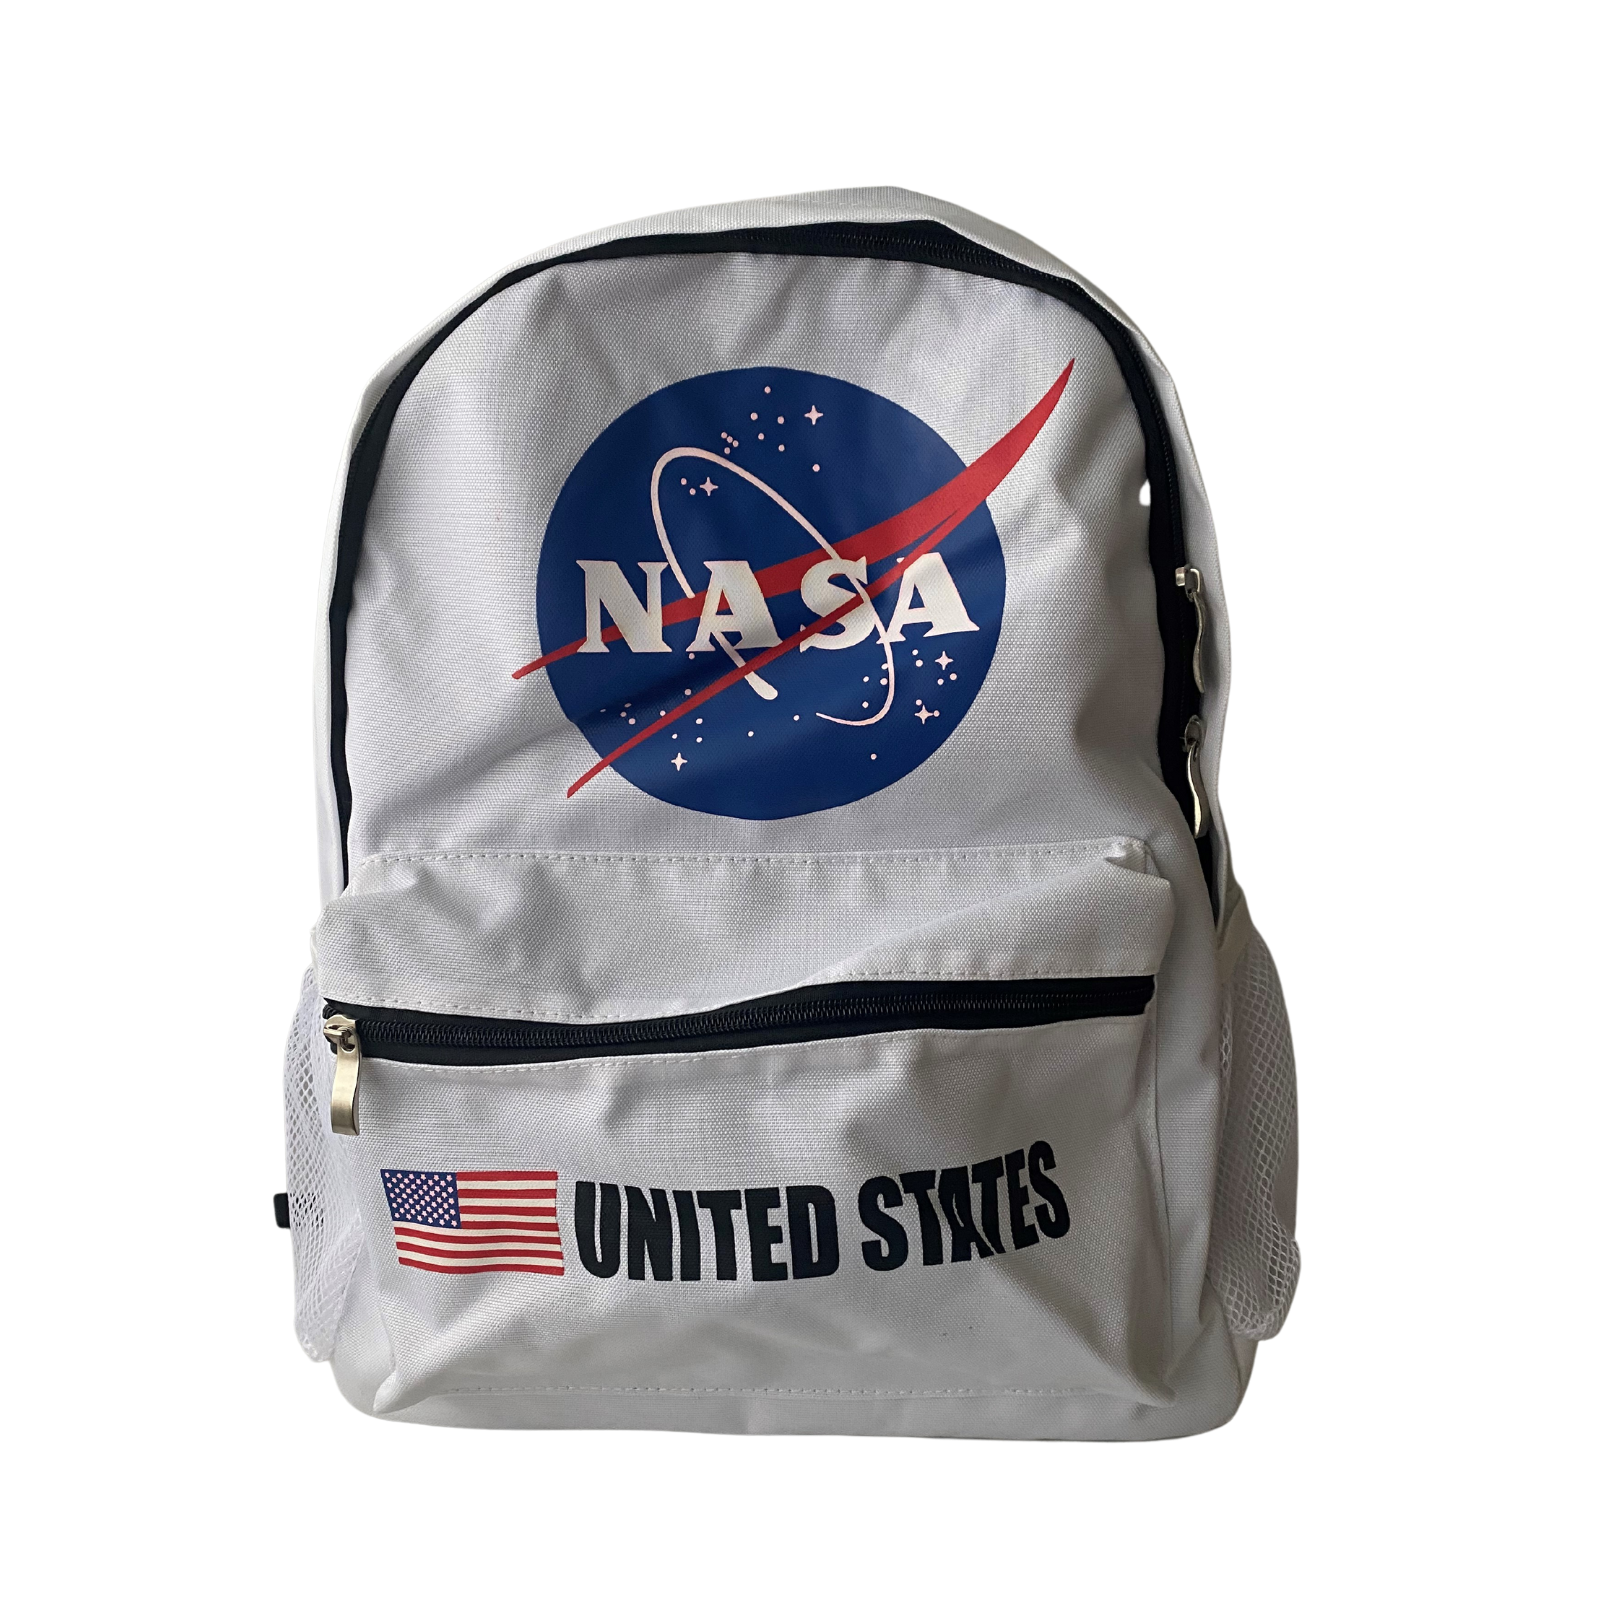 NASA Logo Backpack with Flag and United States